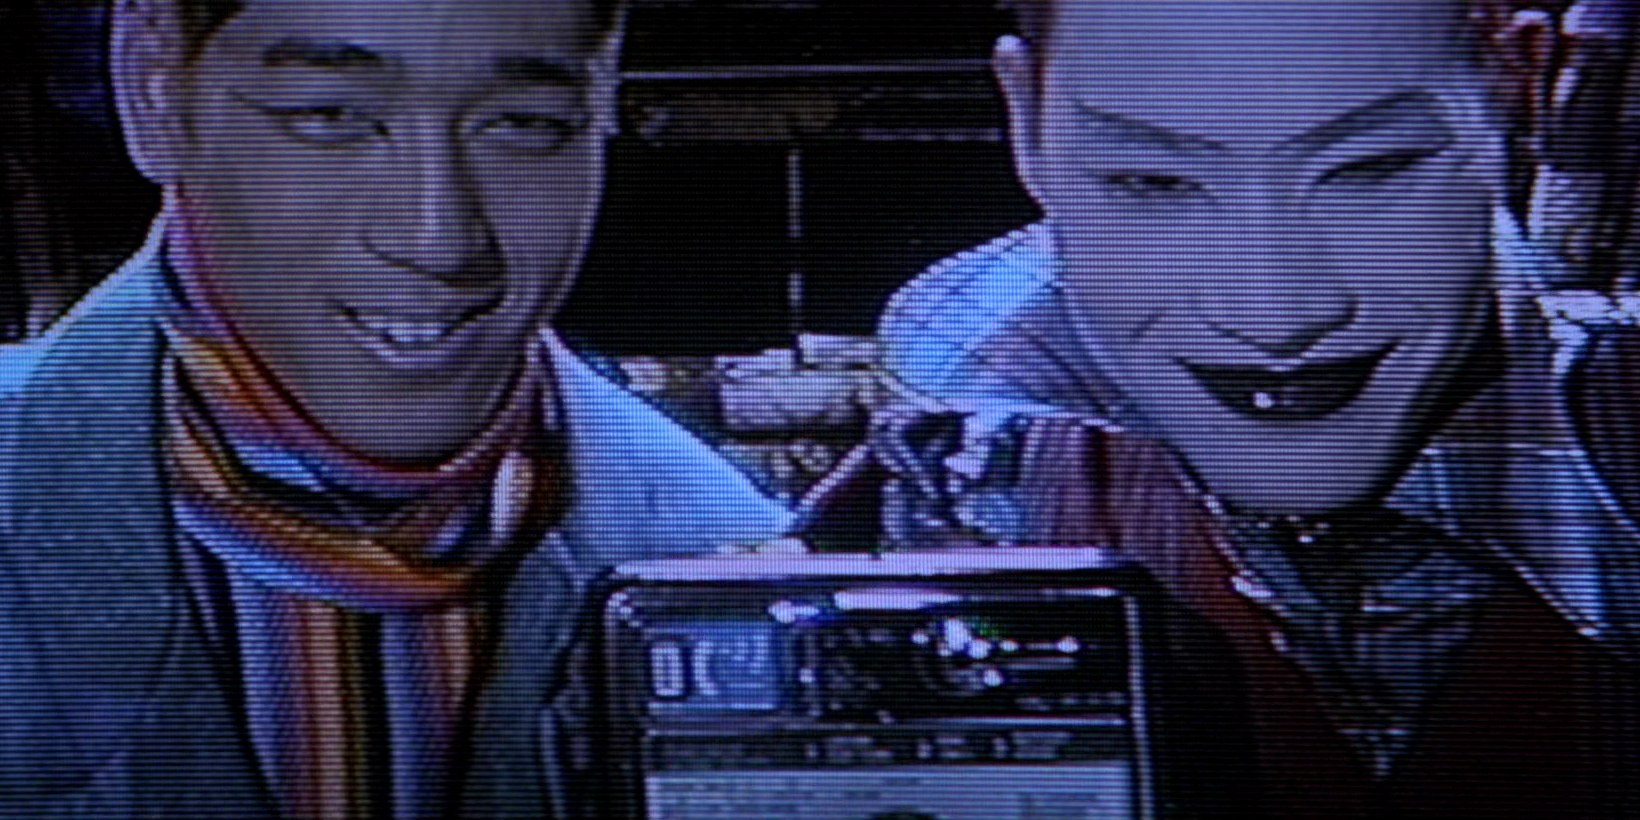 Scene from Hackers (1995) film featuring characters Razor and Blade in colorful fashion attire on their pirate tv show with amateur video grain quality, smiling behind a payphone as they demonstrate phone phreaking hacker techniques. 'That's right, this is a payphone... Don't ask!', they exclaim.